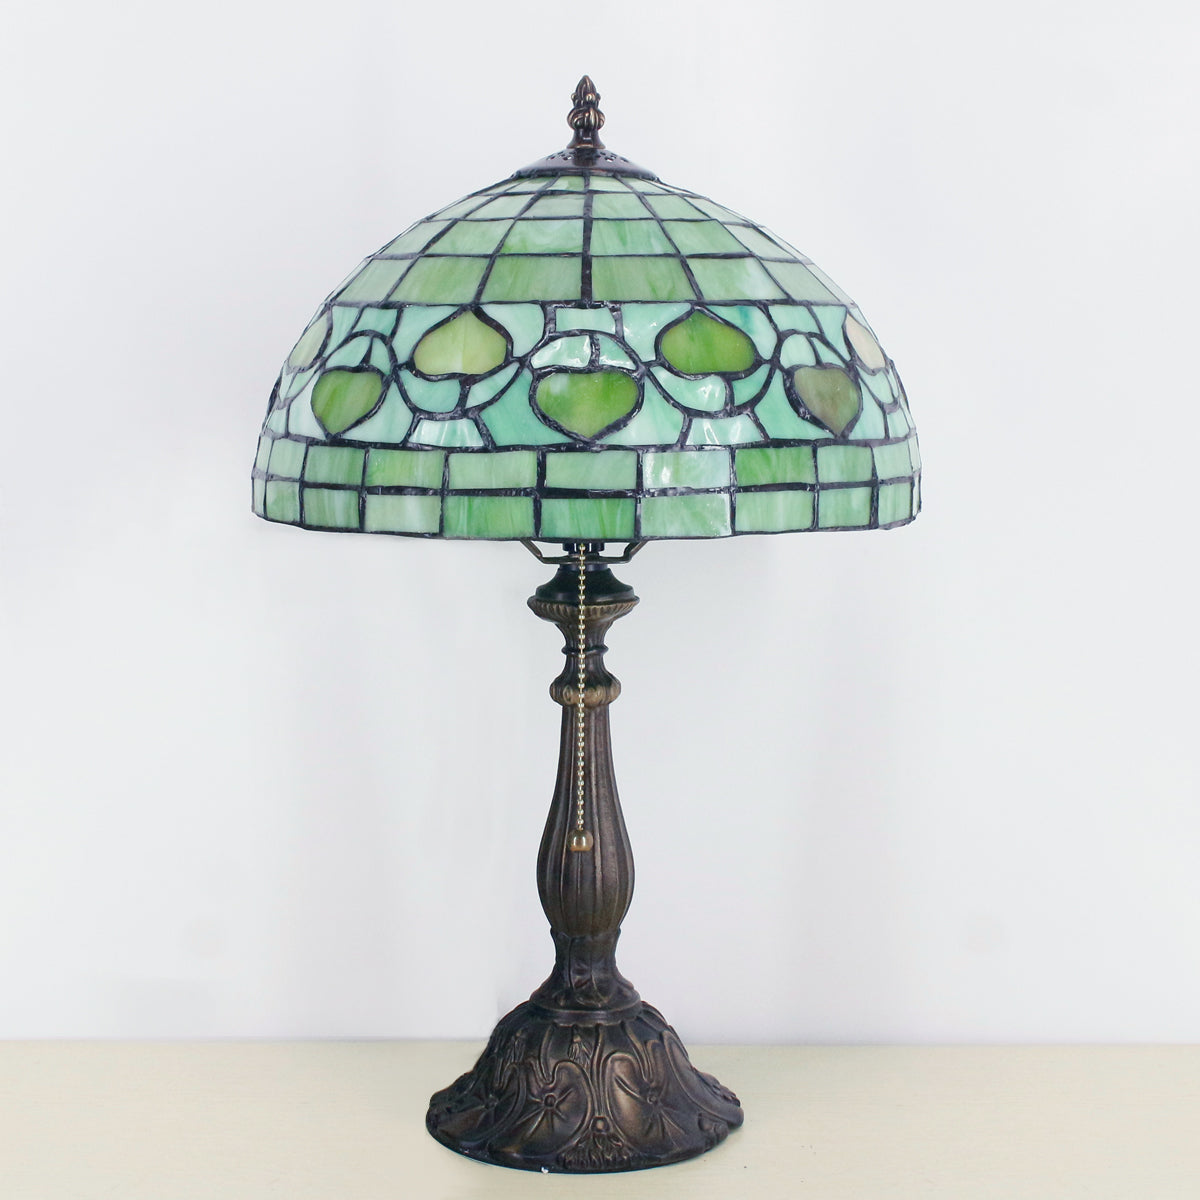 Werfactory® Tiffany Table Lamp W12H19 Inch Green Heart-Shaped Stained Glass Lamp